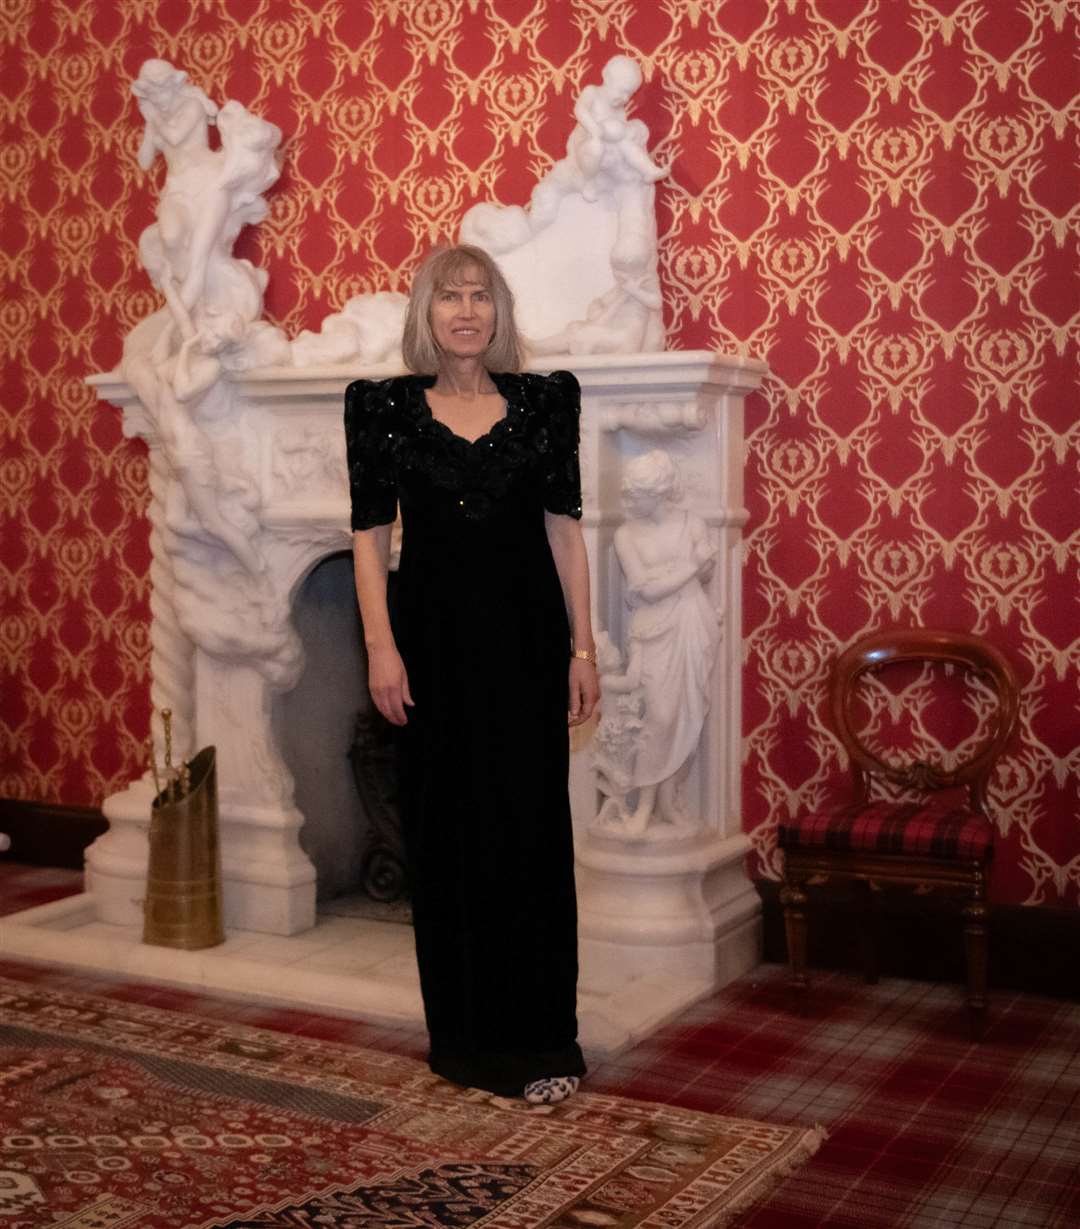 Samantha Kane at a recent Burns supper held in the castle.